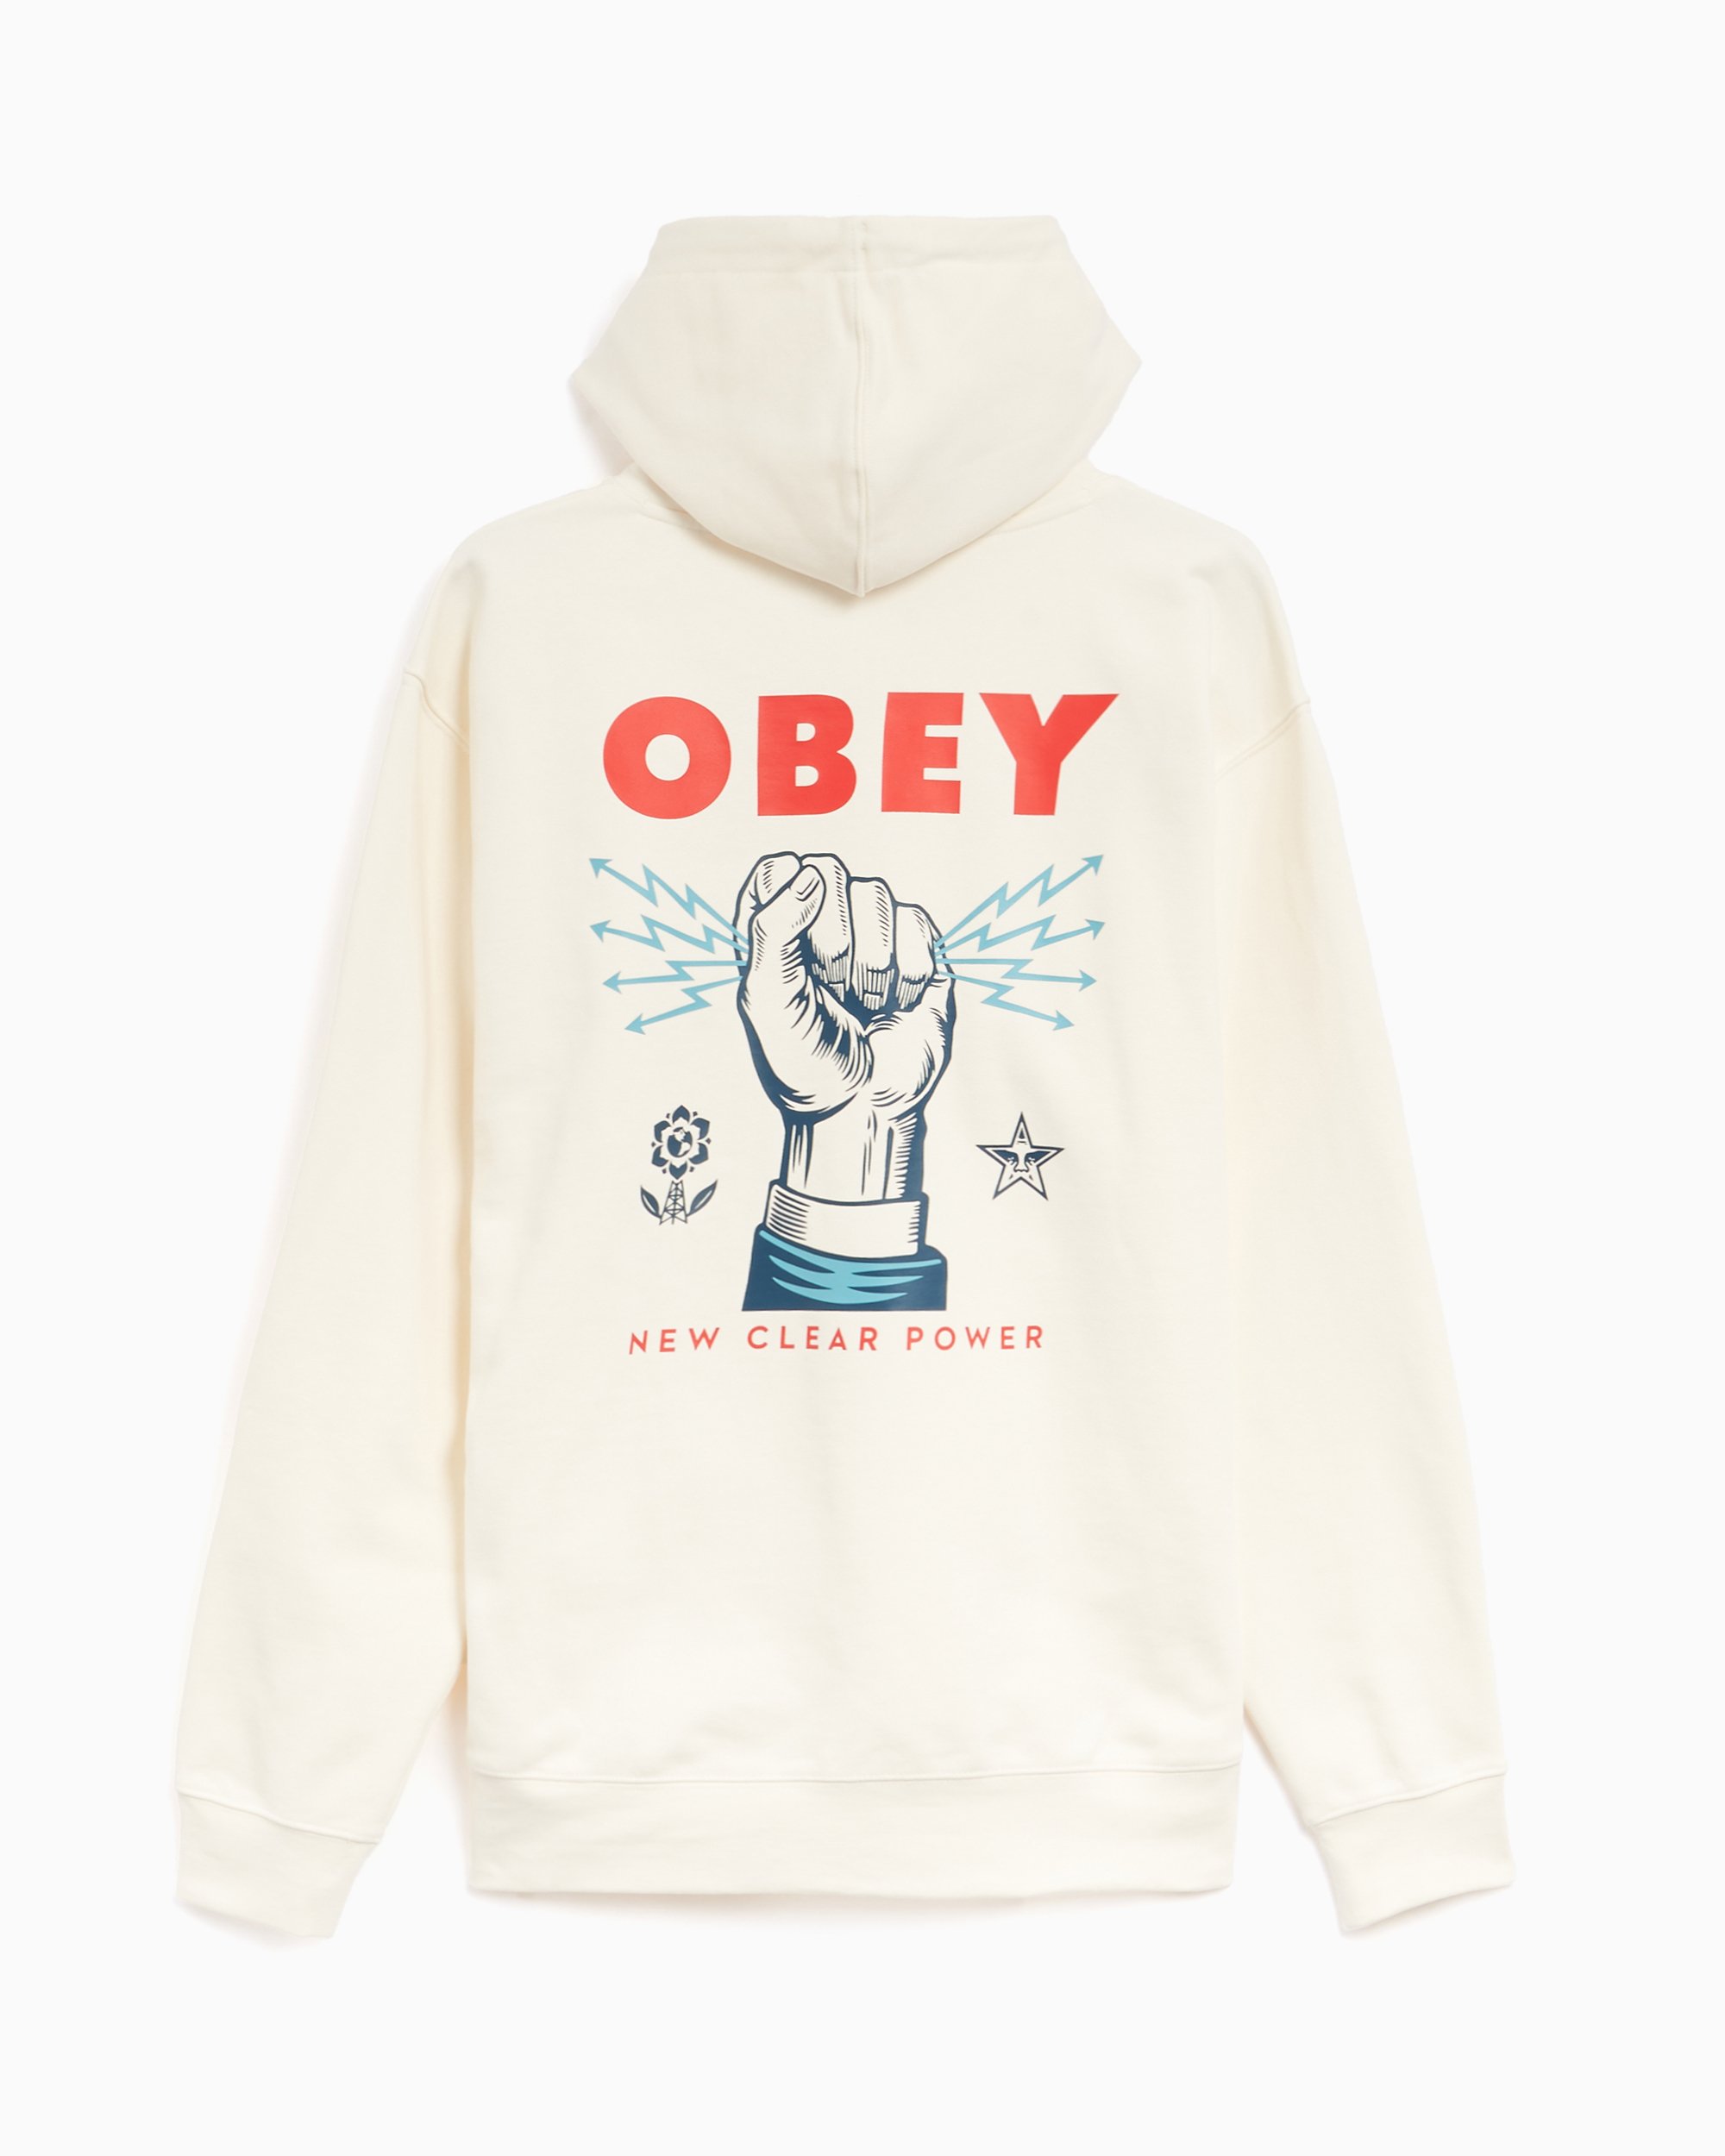 OBEY Clothing Obey New Clear Power Men's Hoodie White 117463779 